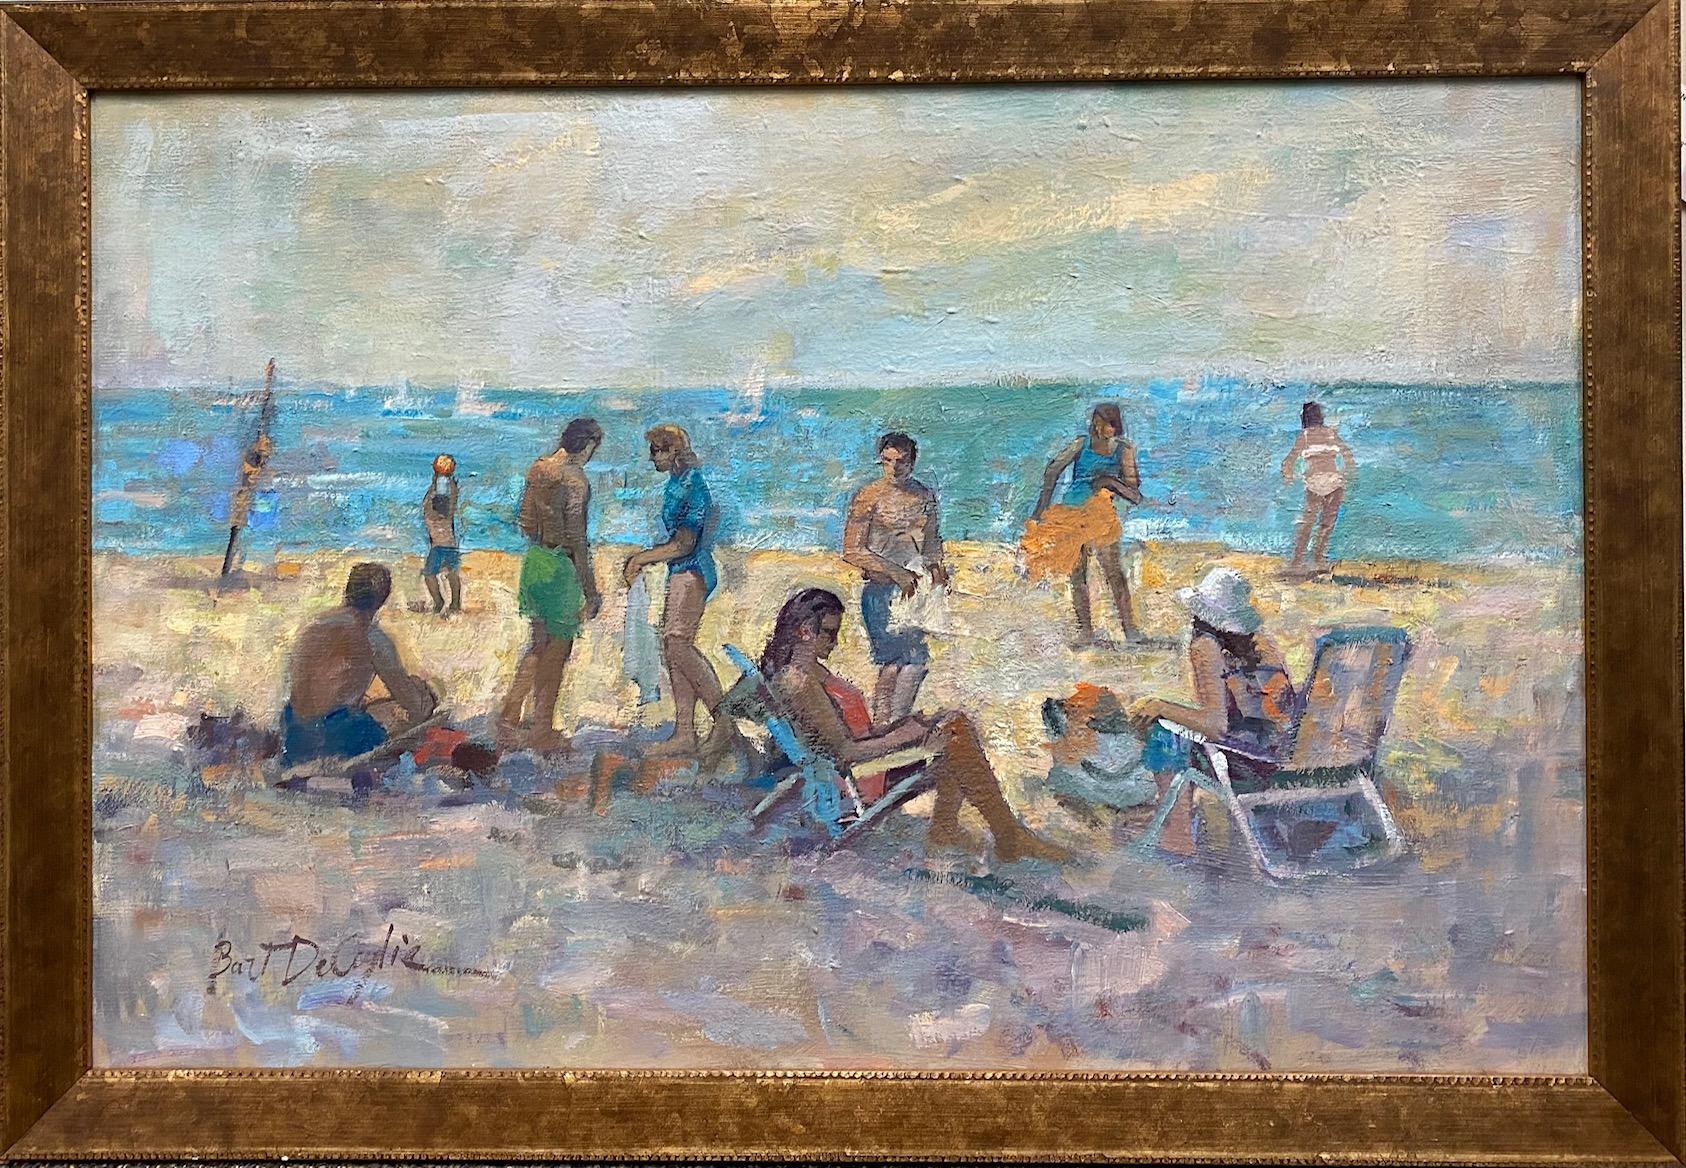 Landscape Painting Bart DeCeglie - Another Day at the Beach, paysage marin figuratif original 20x30